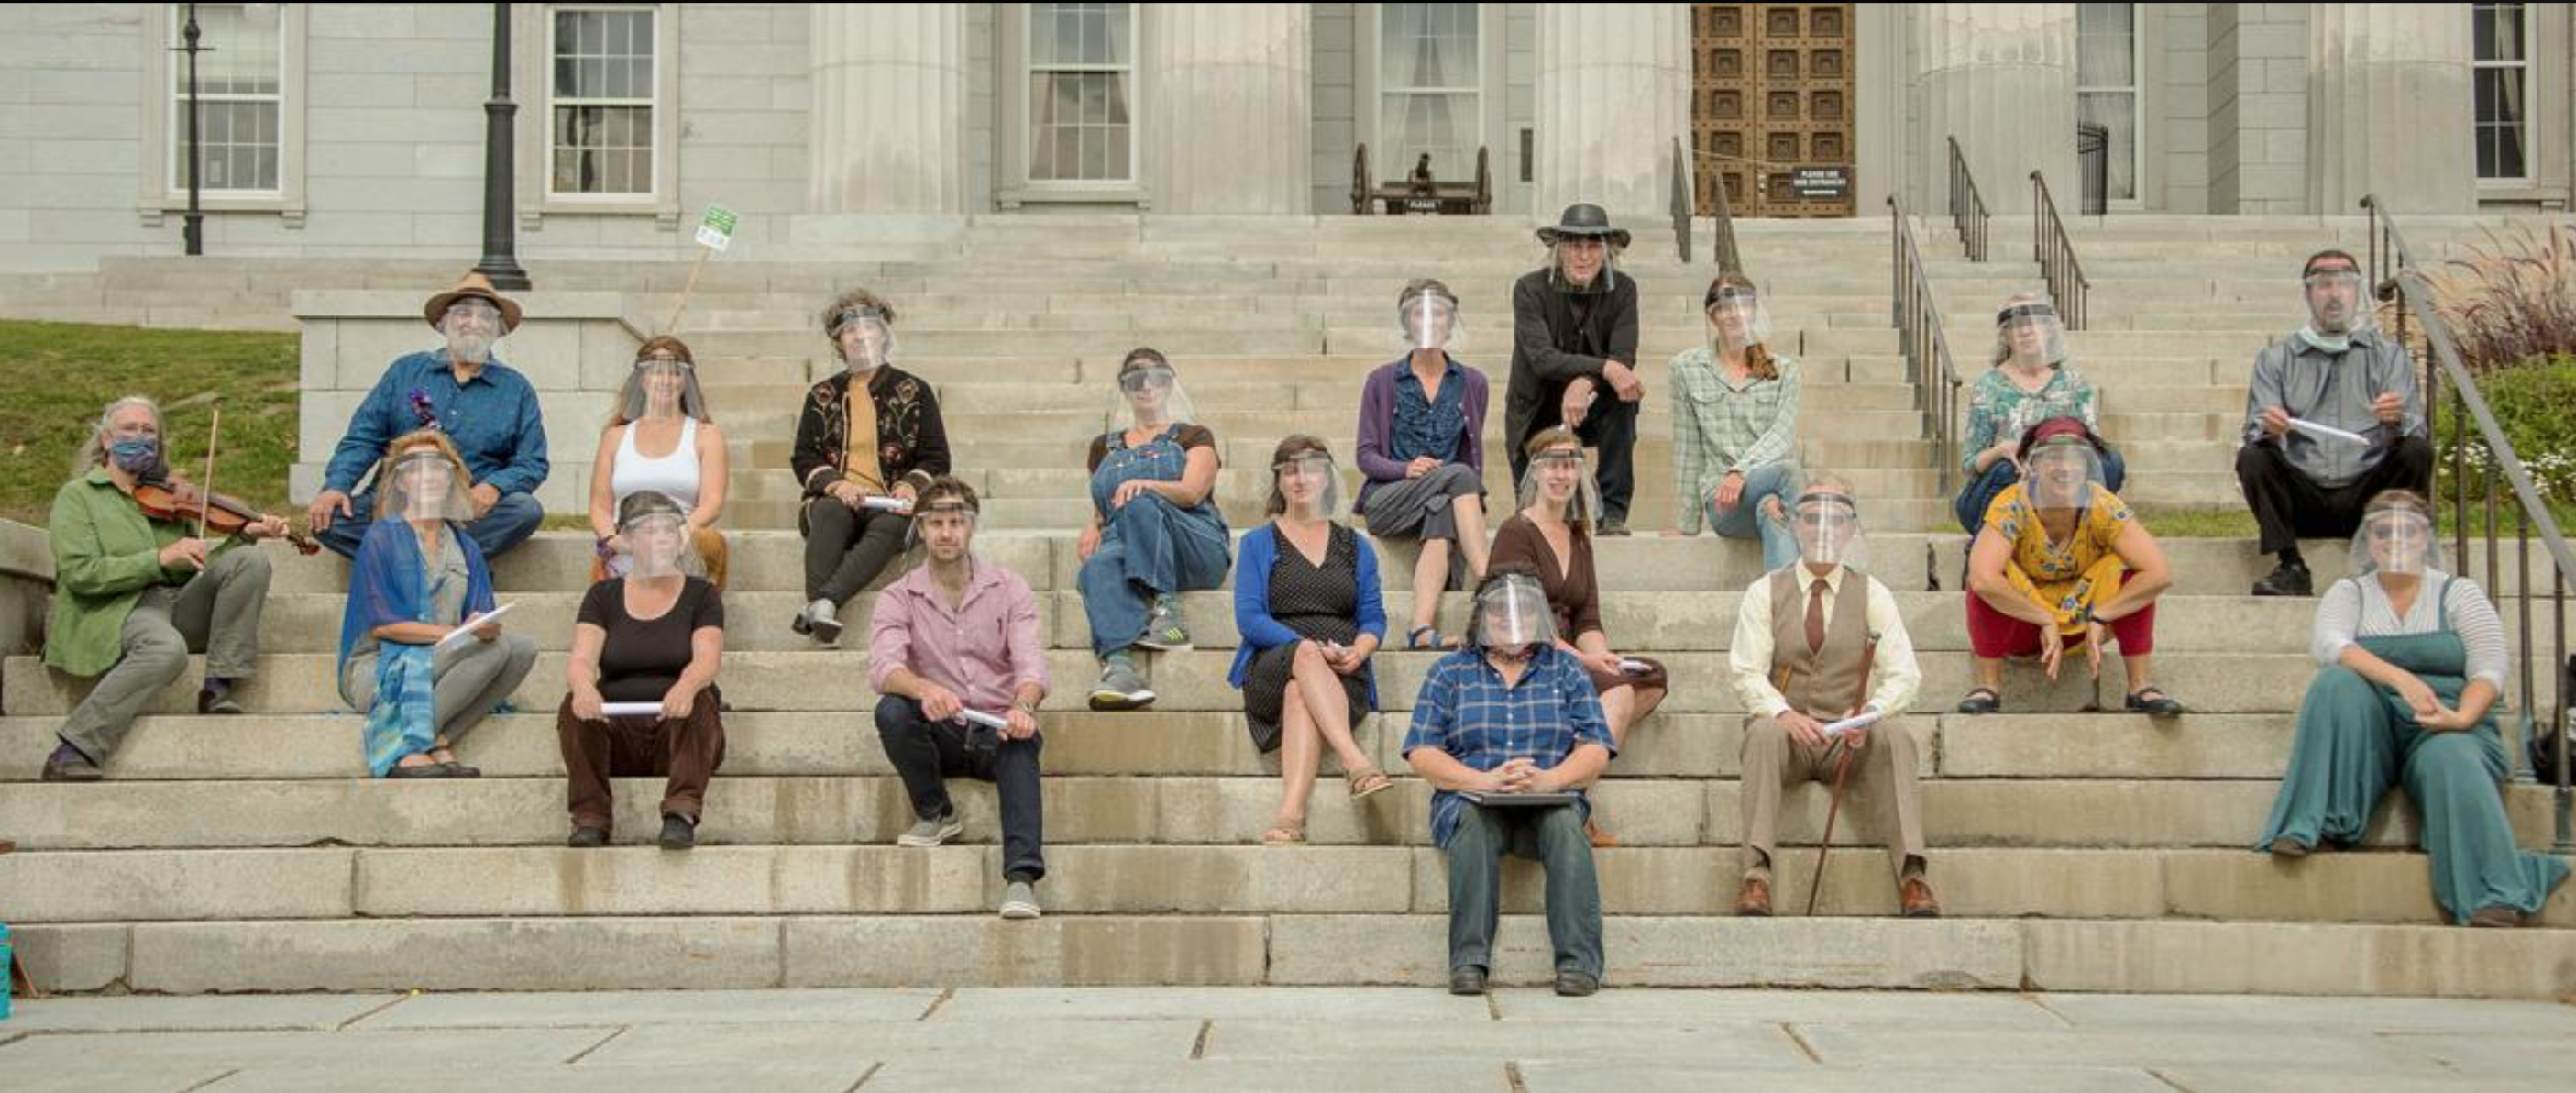 The cast of Lost Nation Theater's Midsommer Nights Dreame on the Steps of the Vermont State House